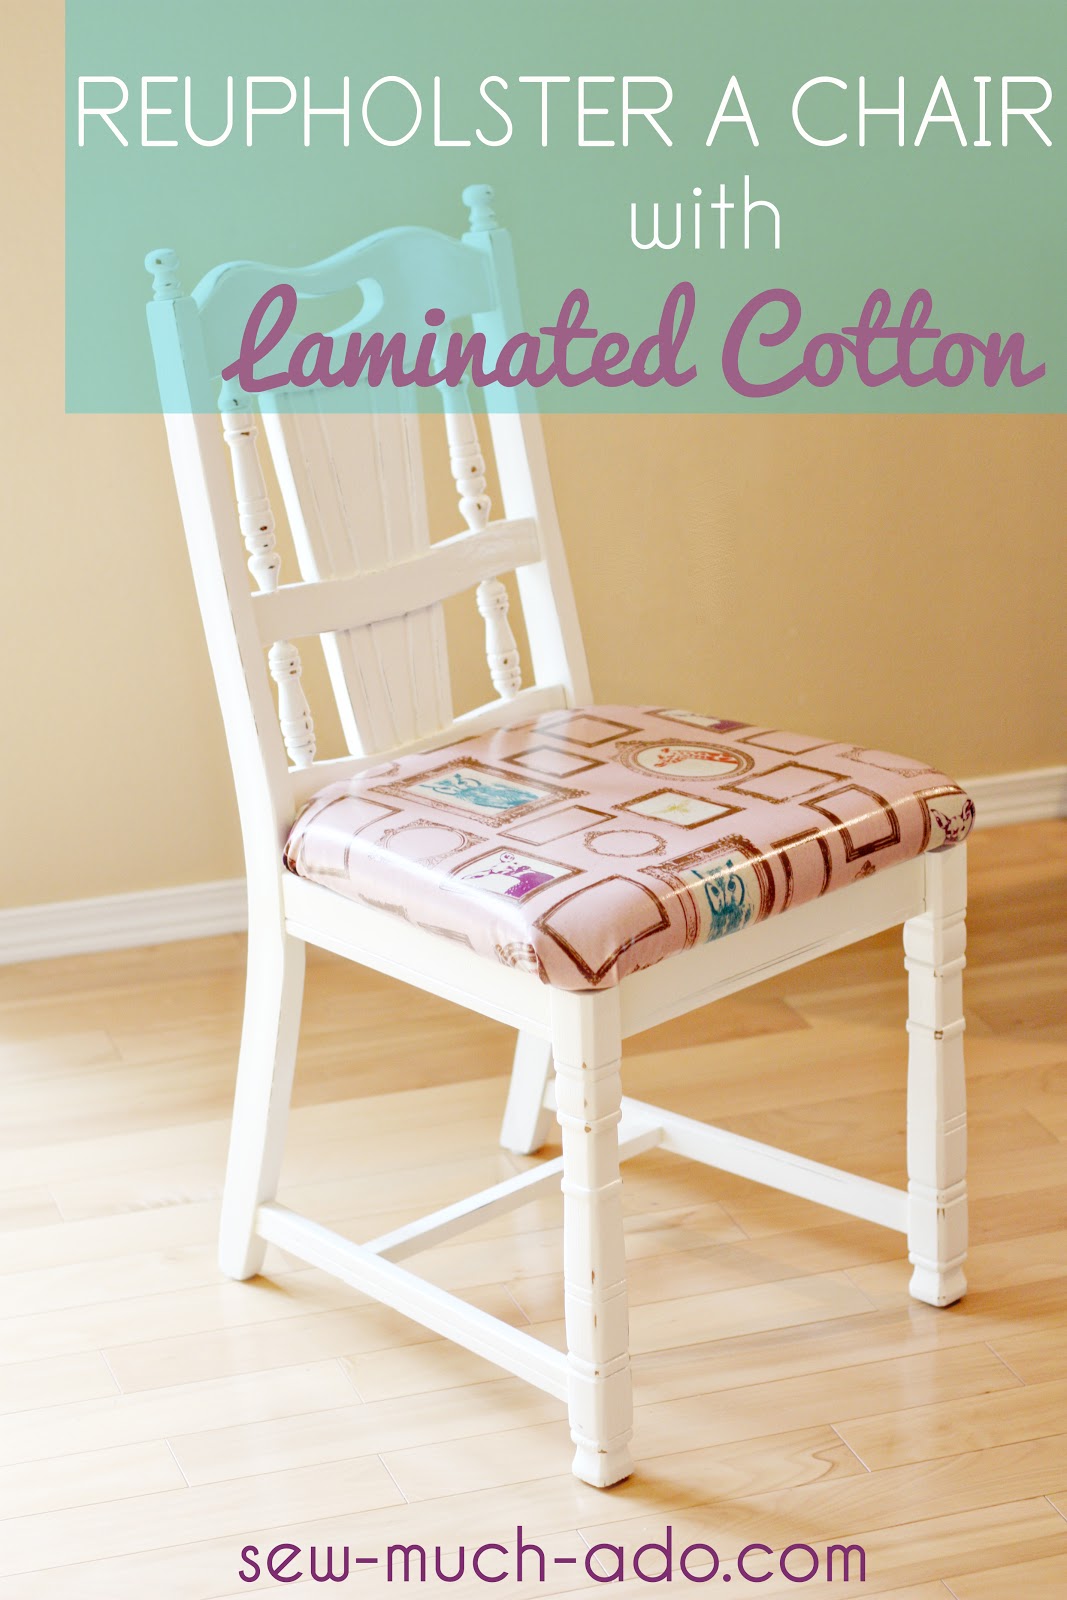 How To Reupholster Chairs With Laminated Cotton Sew Much Ado